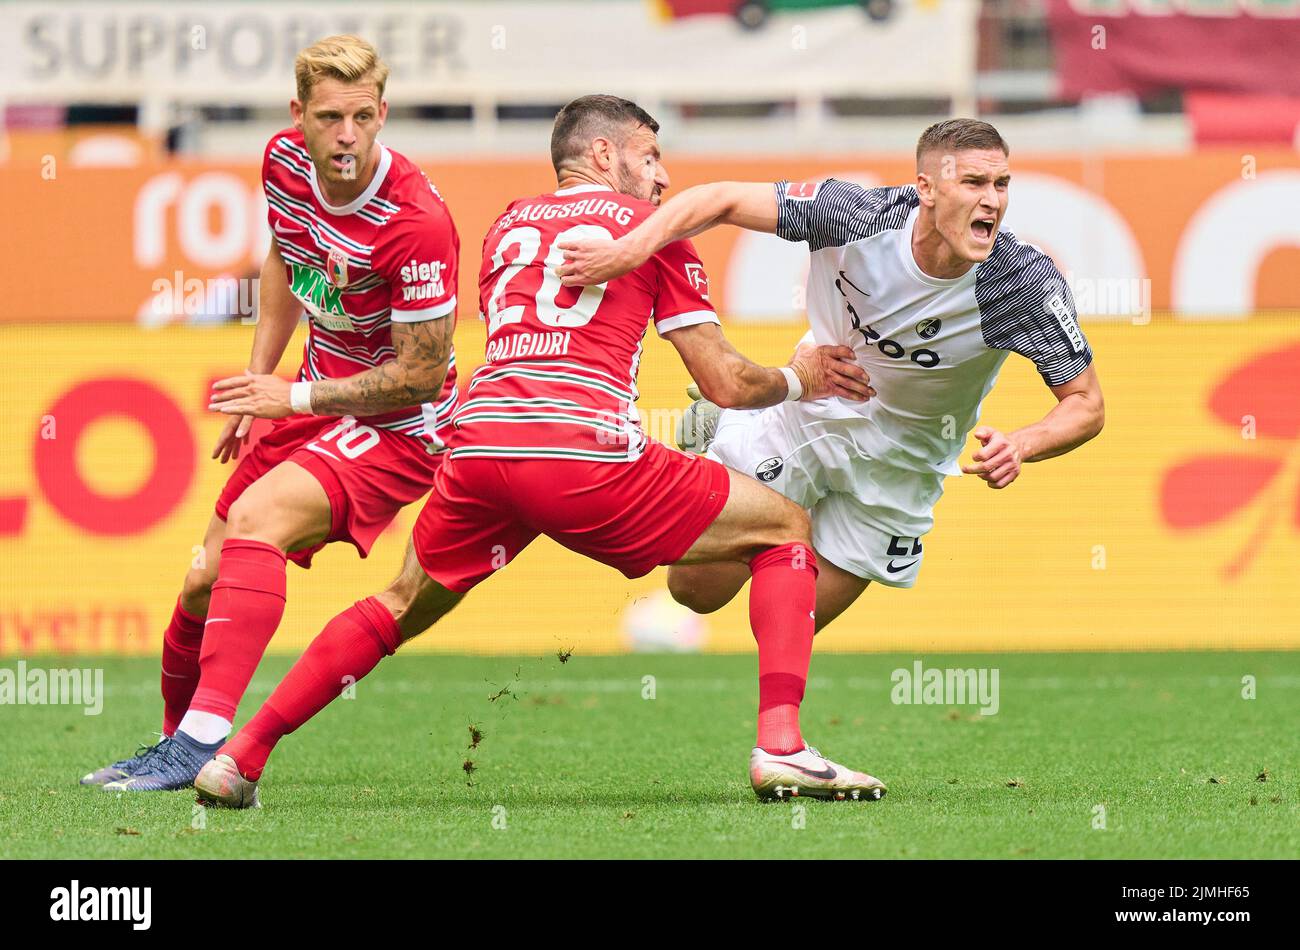 Amaral Borduchi IAGO, FCA 22  Arne Maier, FCA 10 compete for the ball, tackling, duel, header, zweikampf, action, fight against Roland SALLAI, FRG 22  in the match FC AUGSBURG - SC FREIBURG 0-4 1.German Football League on Aug 06, 2022 in Augsburg, Germany. Season 2022/2023, matchday 1, 1.Bundesliga, FCB, Munich, 1.Spieltag © Peter Schatz / Alamy Live News    - DFL REGULATIONS PROHIBIT ANY USE OF PHOTOGRAPHS as IMAGE SEQUENCES and/or QUASI-VIDEO - Stock Photo